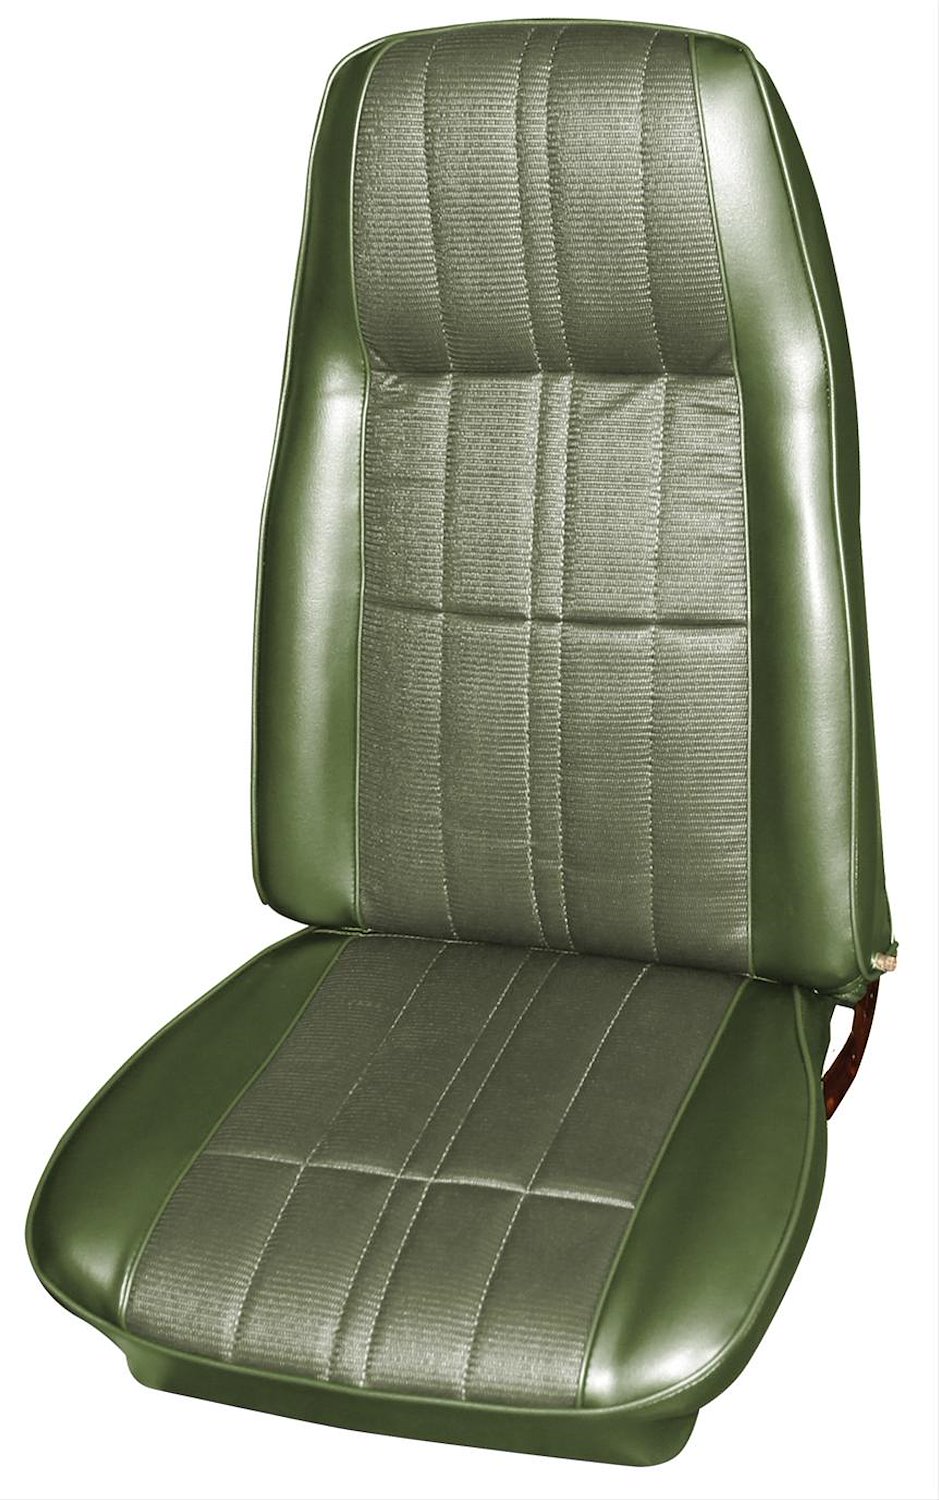 1971-1973 Ford Mustang Sports-Roof Deluxe Interior Front Bucket and Rear Bench Seat Upholstery Set